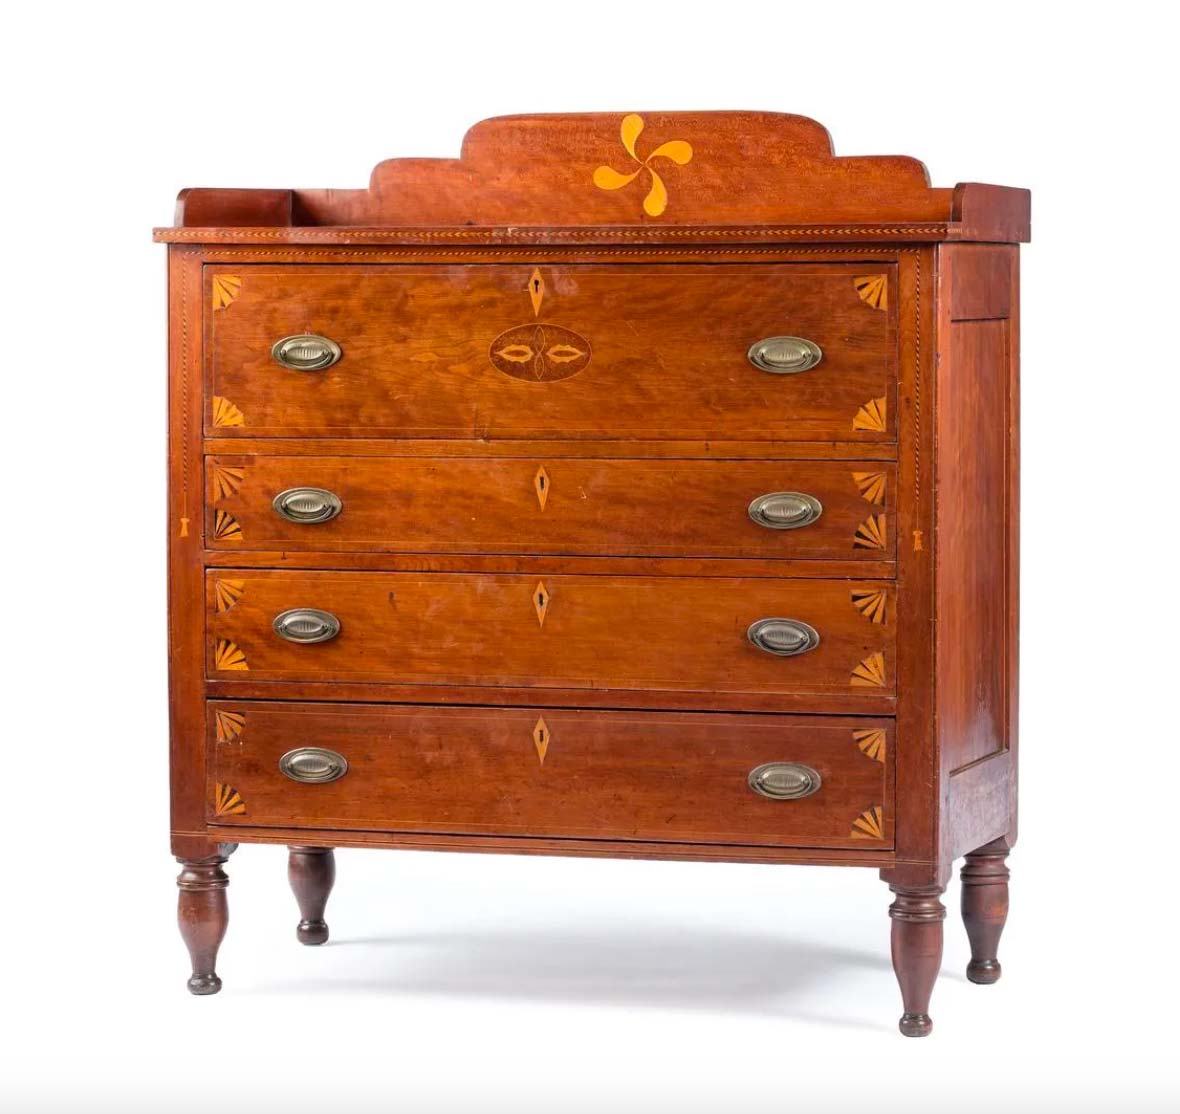 Federal fan and fylfot inlaid cherrywood chest of drawers, circa 1840, $15,360. Image courtesy Cowan's and LiveAuctioneers.com